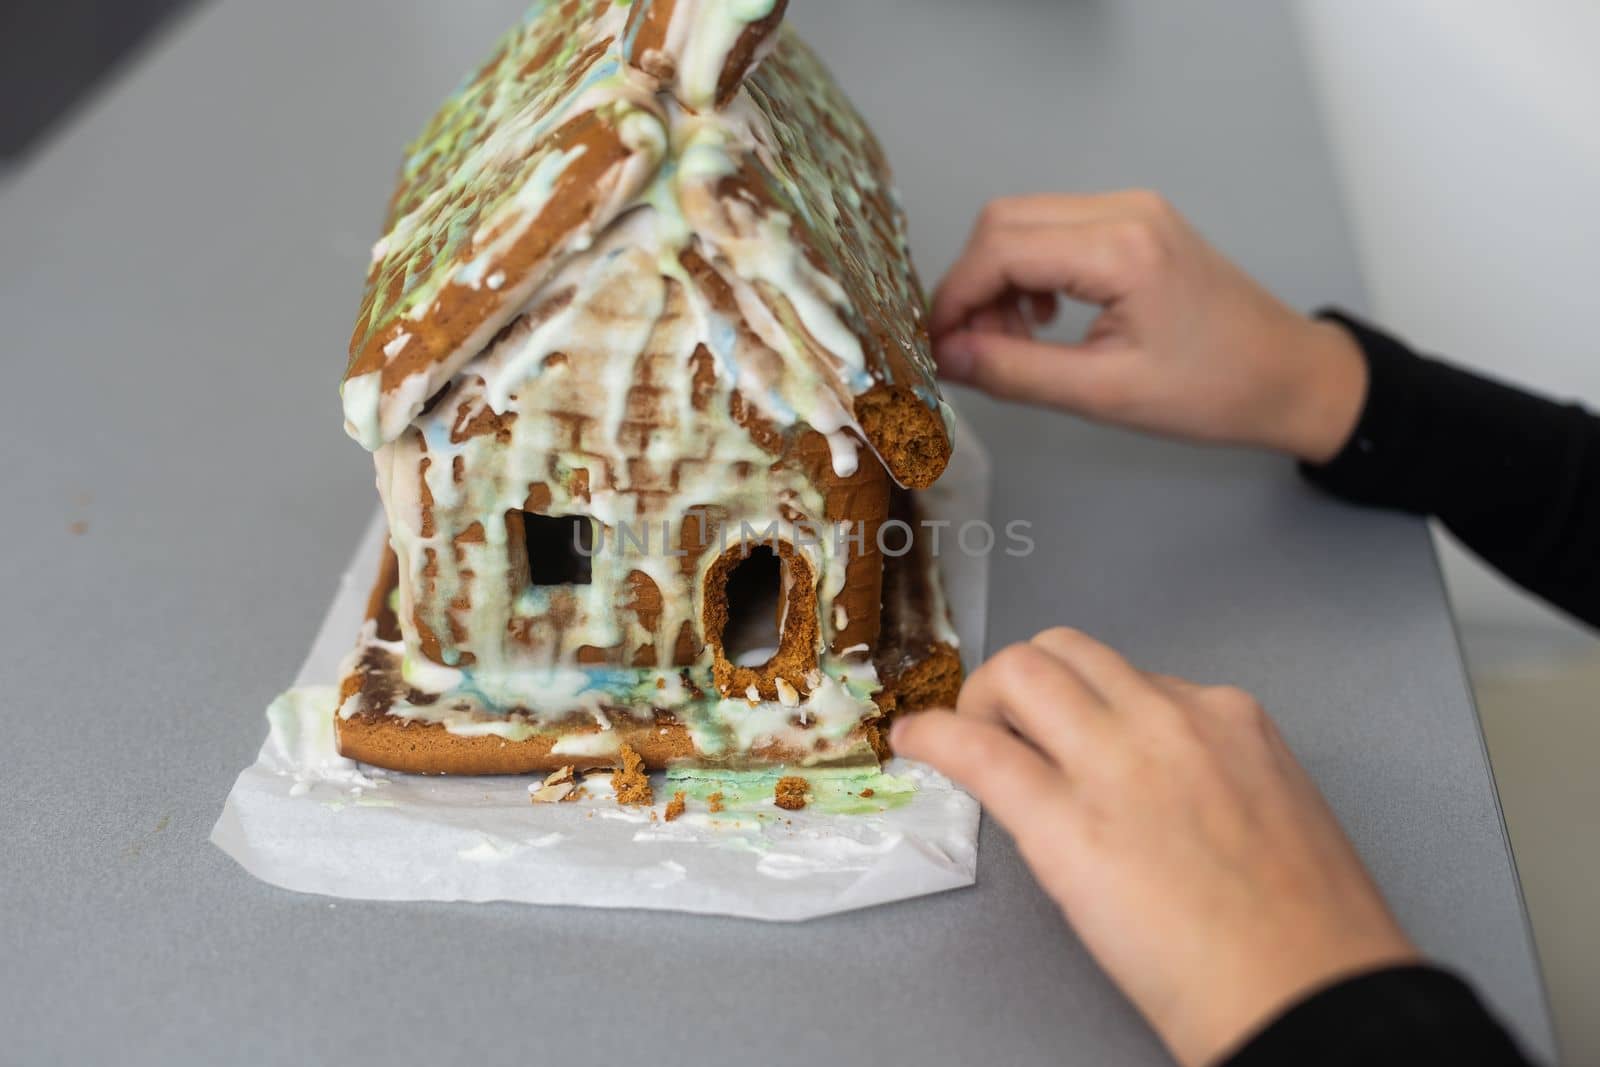 Kids with gingerbread house, A teenage girl is eating a gingerbread house by Andelov13